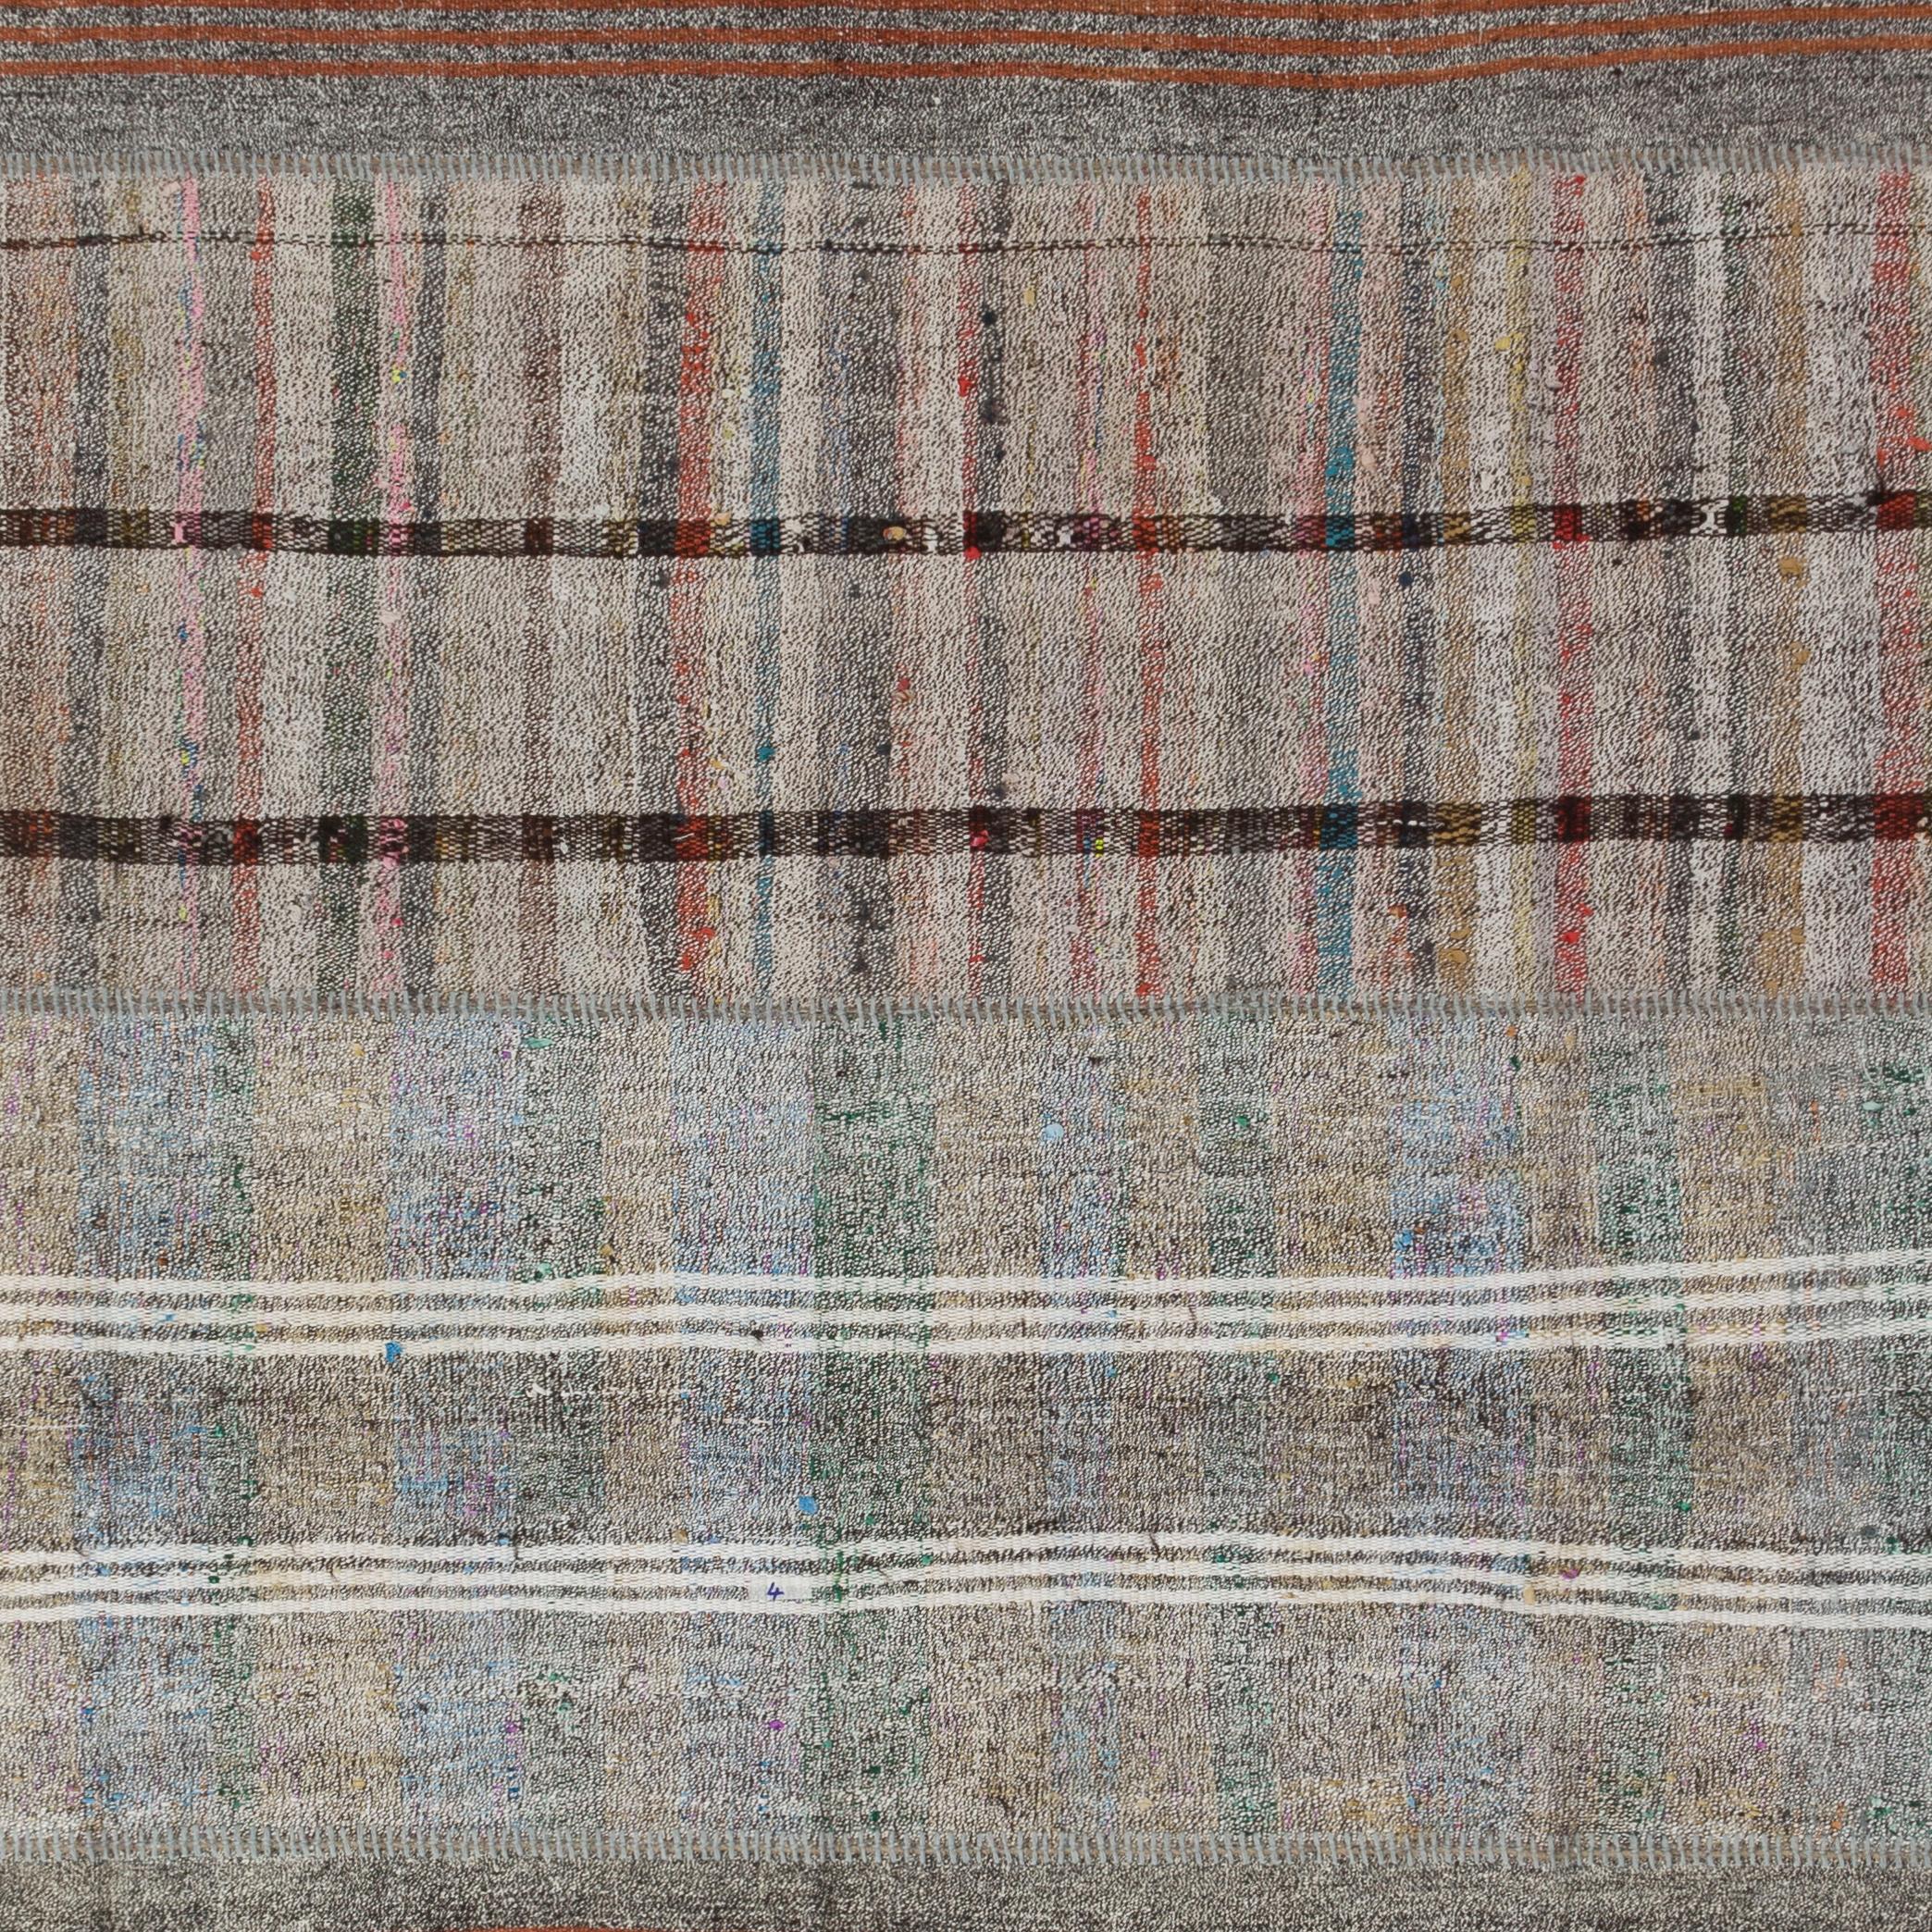 A vintage hand-woven Turkish nomadic patchwork kilim/flat-weave, made up hand-stitched pieces. This sturdy and lightweight floor covering was woven with cotton and goat hair and features stripes against a speckled looking background in soft neutral